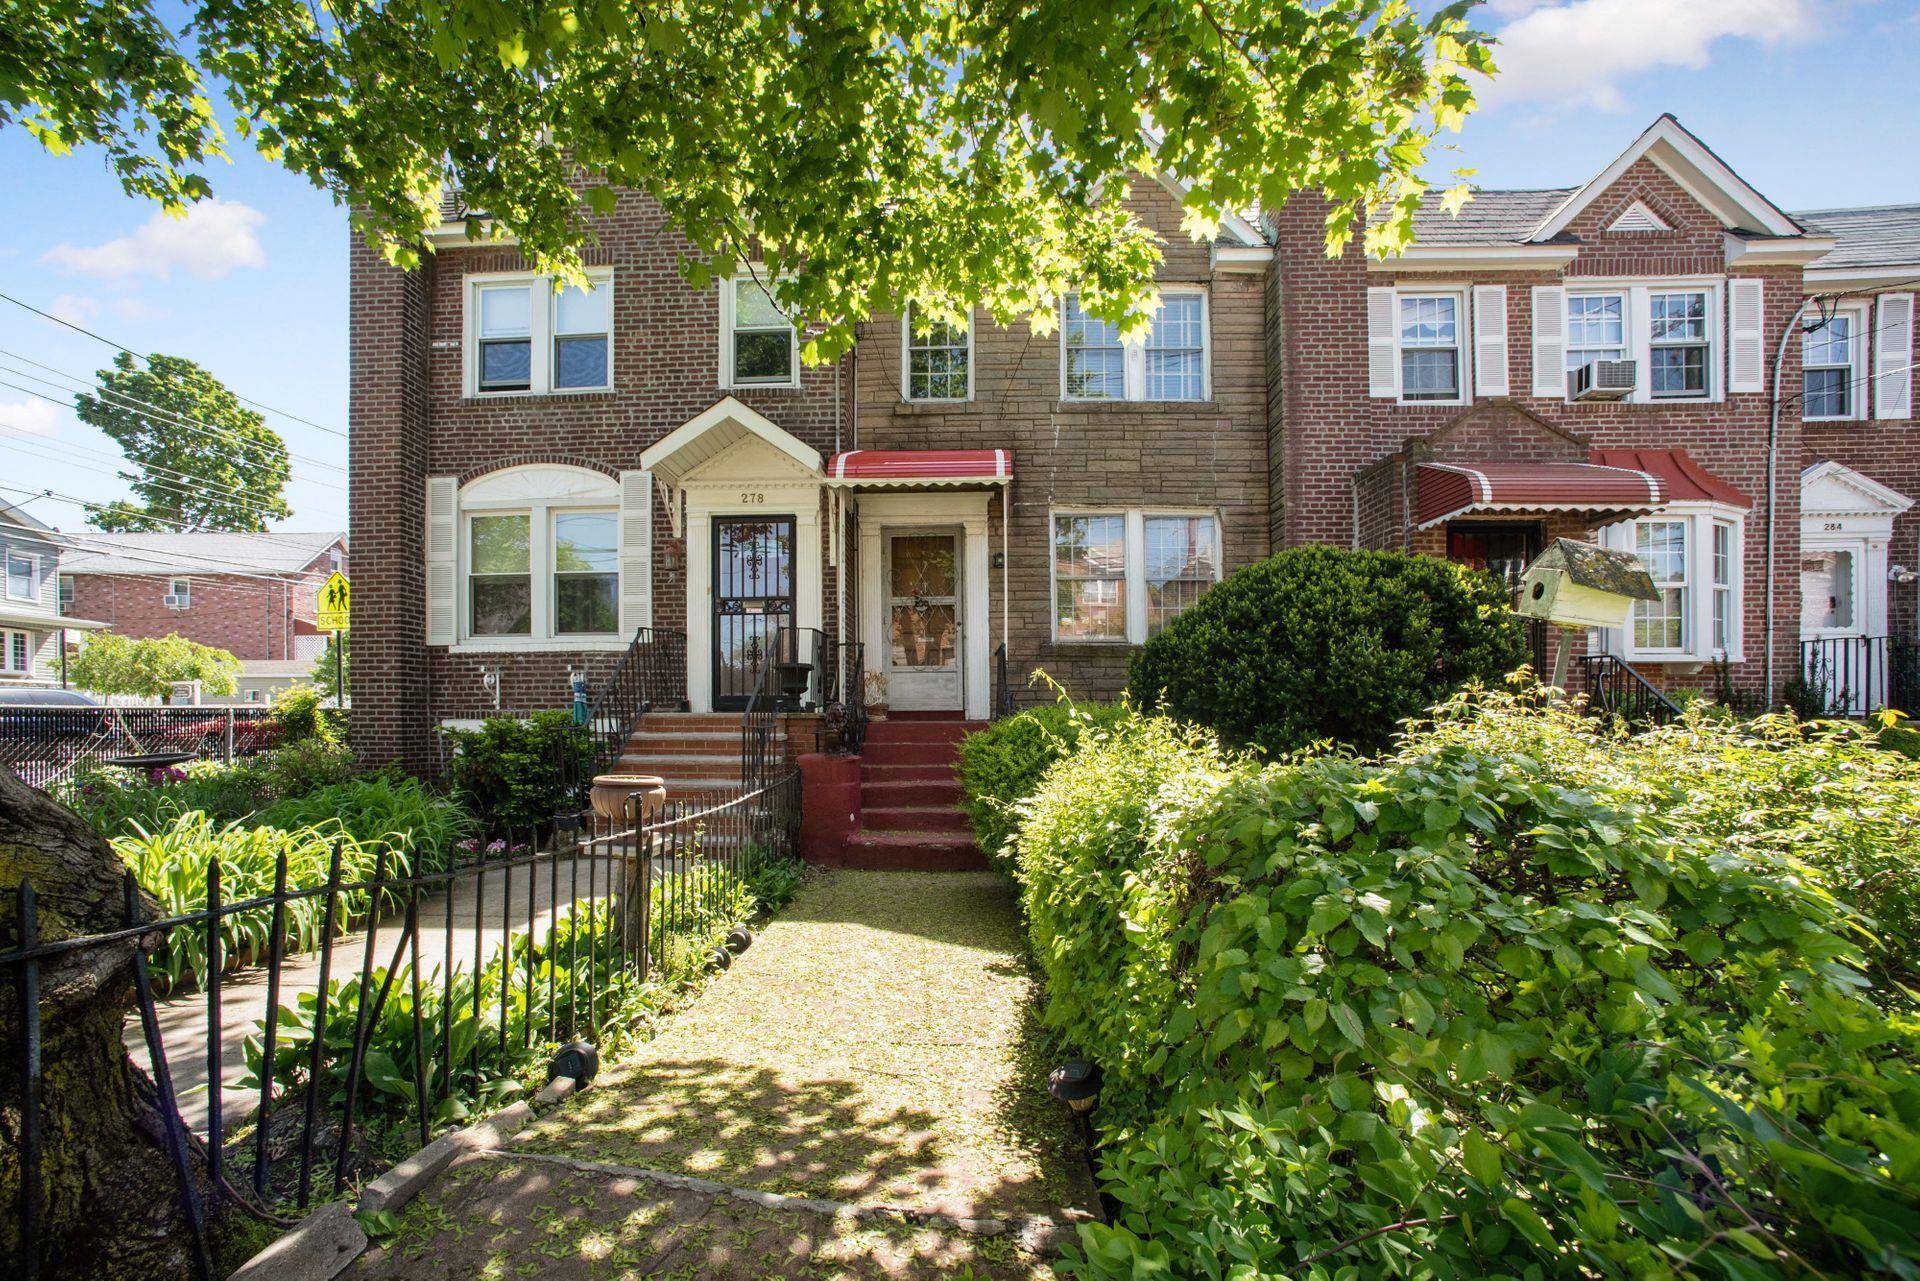 Classic single family home for sale in the Kingsbridge area of the Bronx.